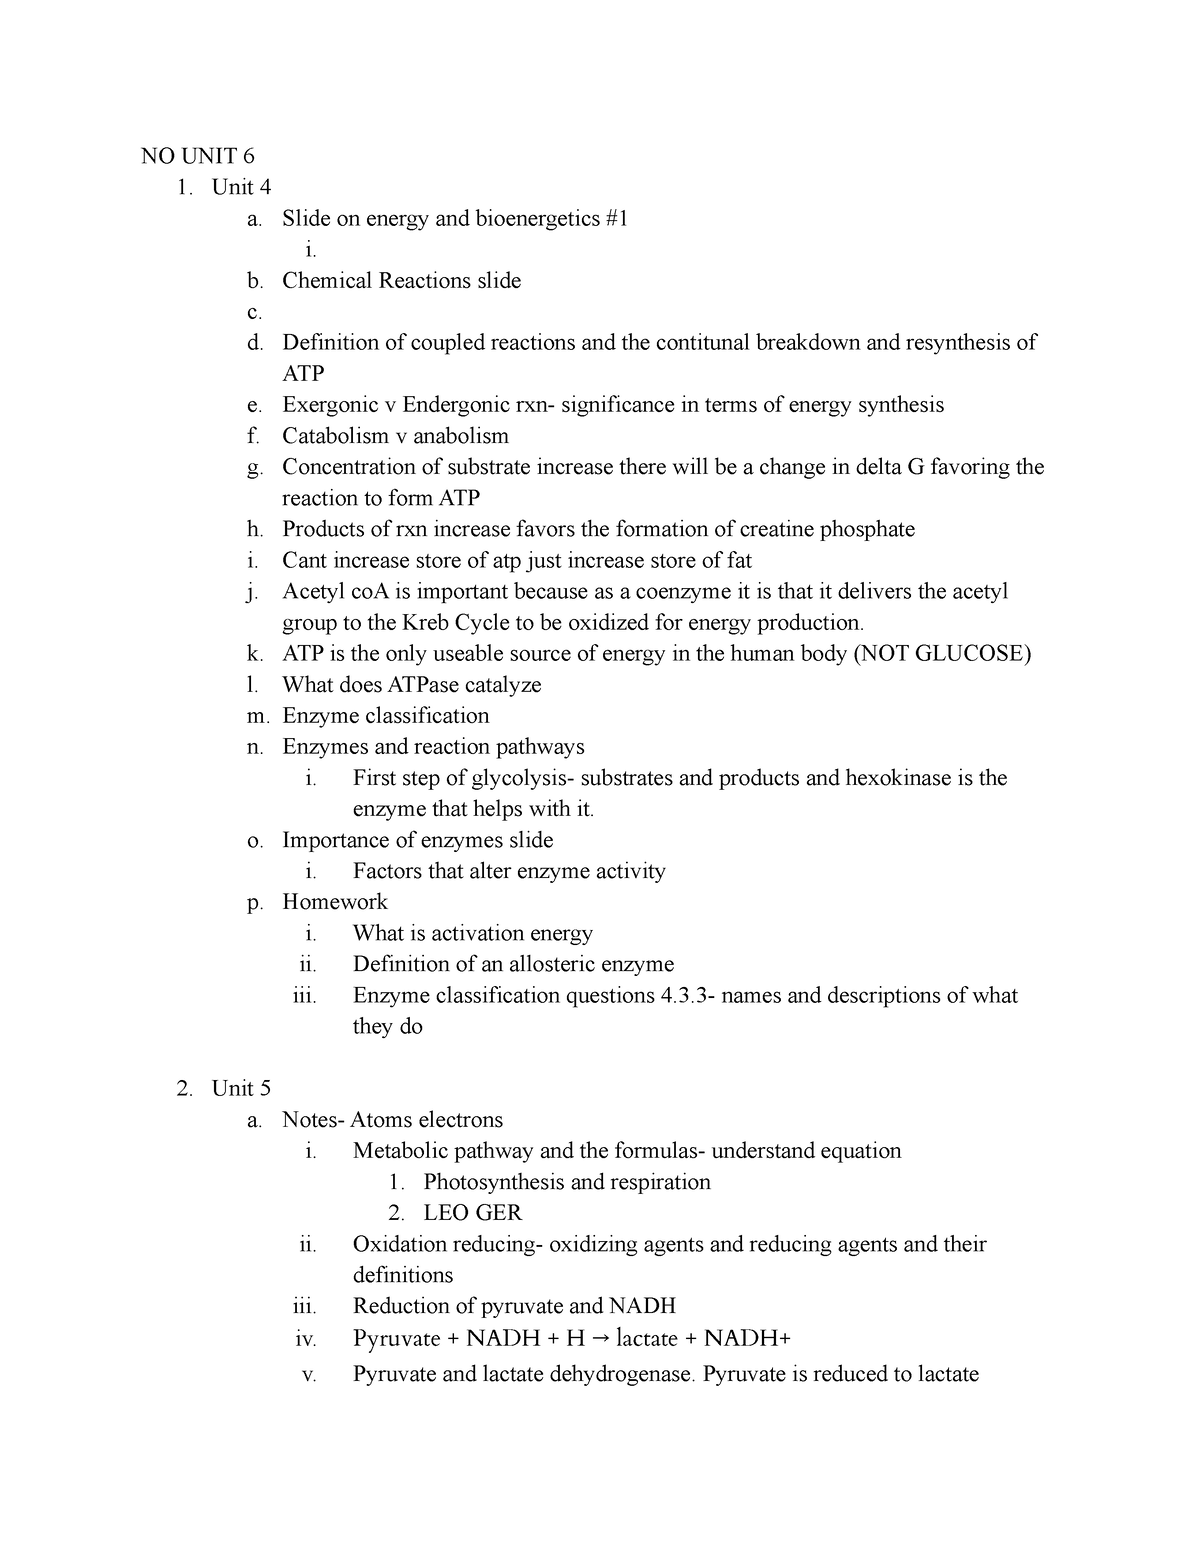 Study Guide EXPH305 Exam 2 - NO UNIT 6 Unit 4 a. Slide on energy and ...